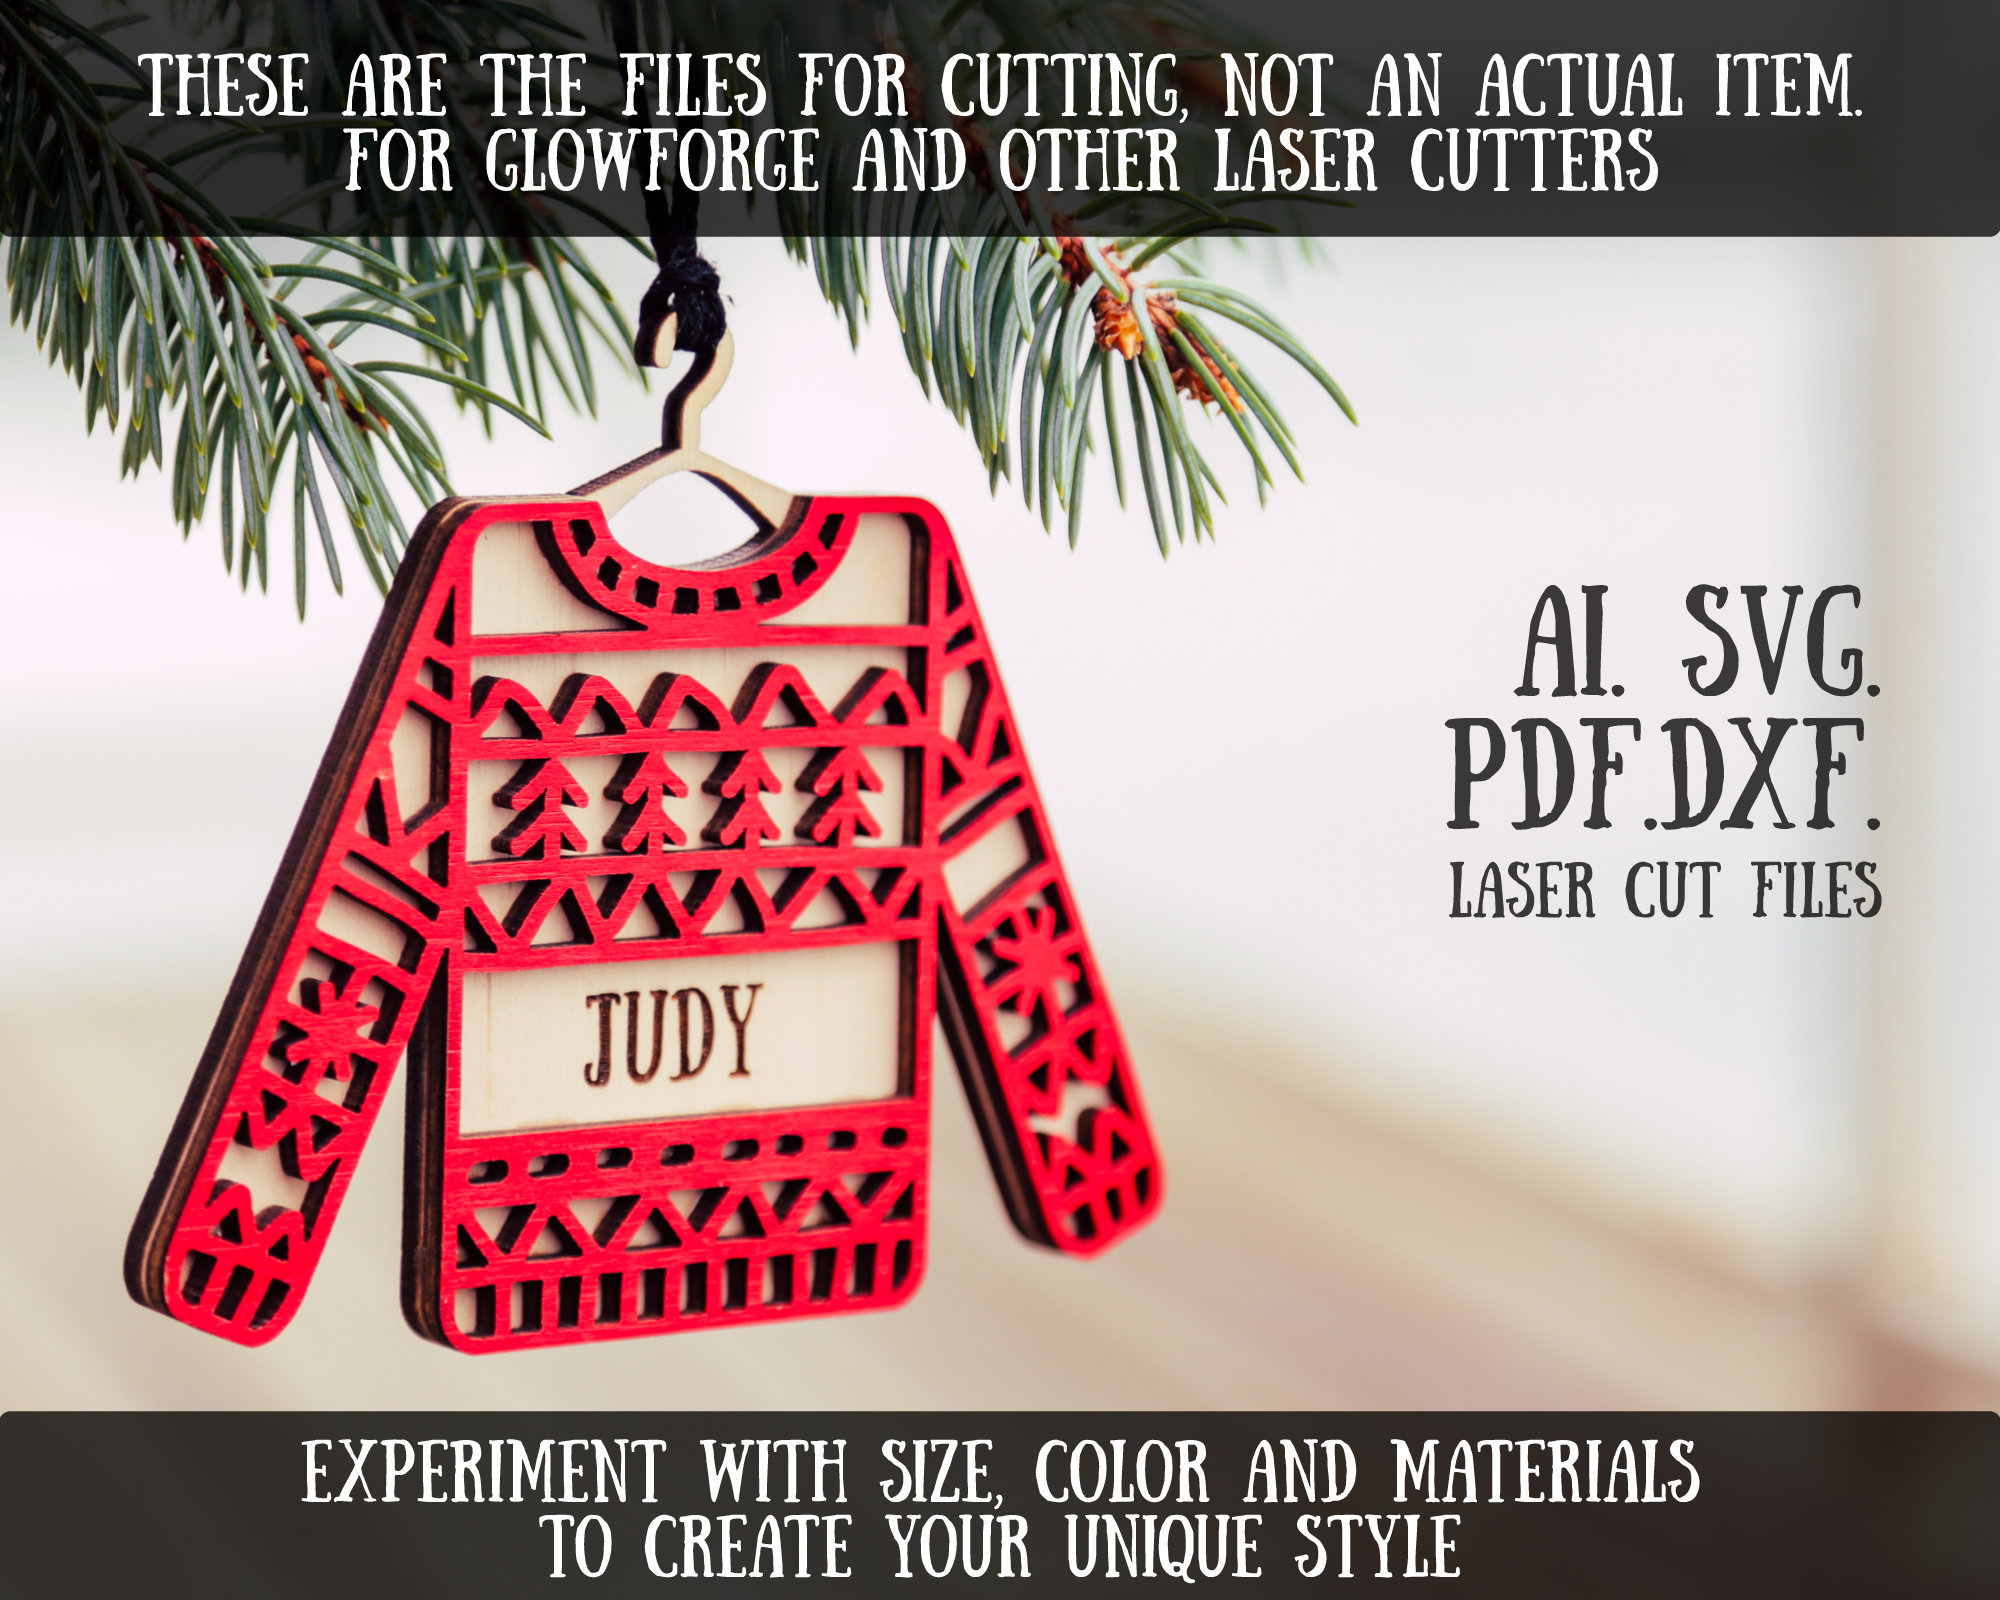 Make Your Christmas Moparific With Ugly Sweaters, Tree Baubles